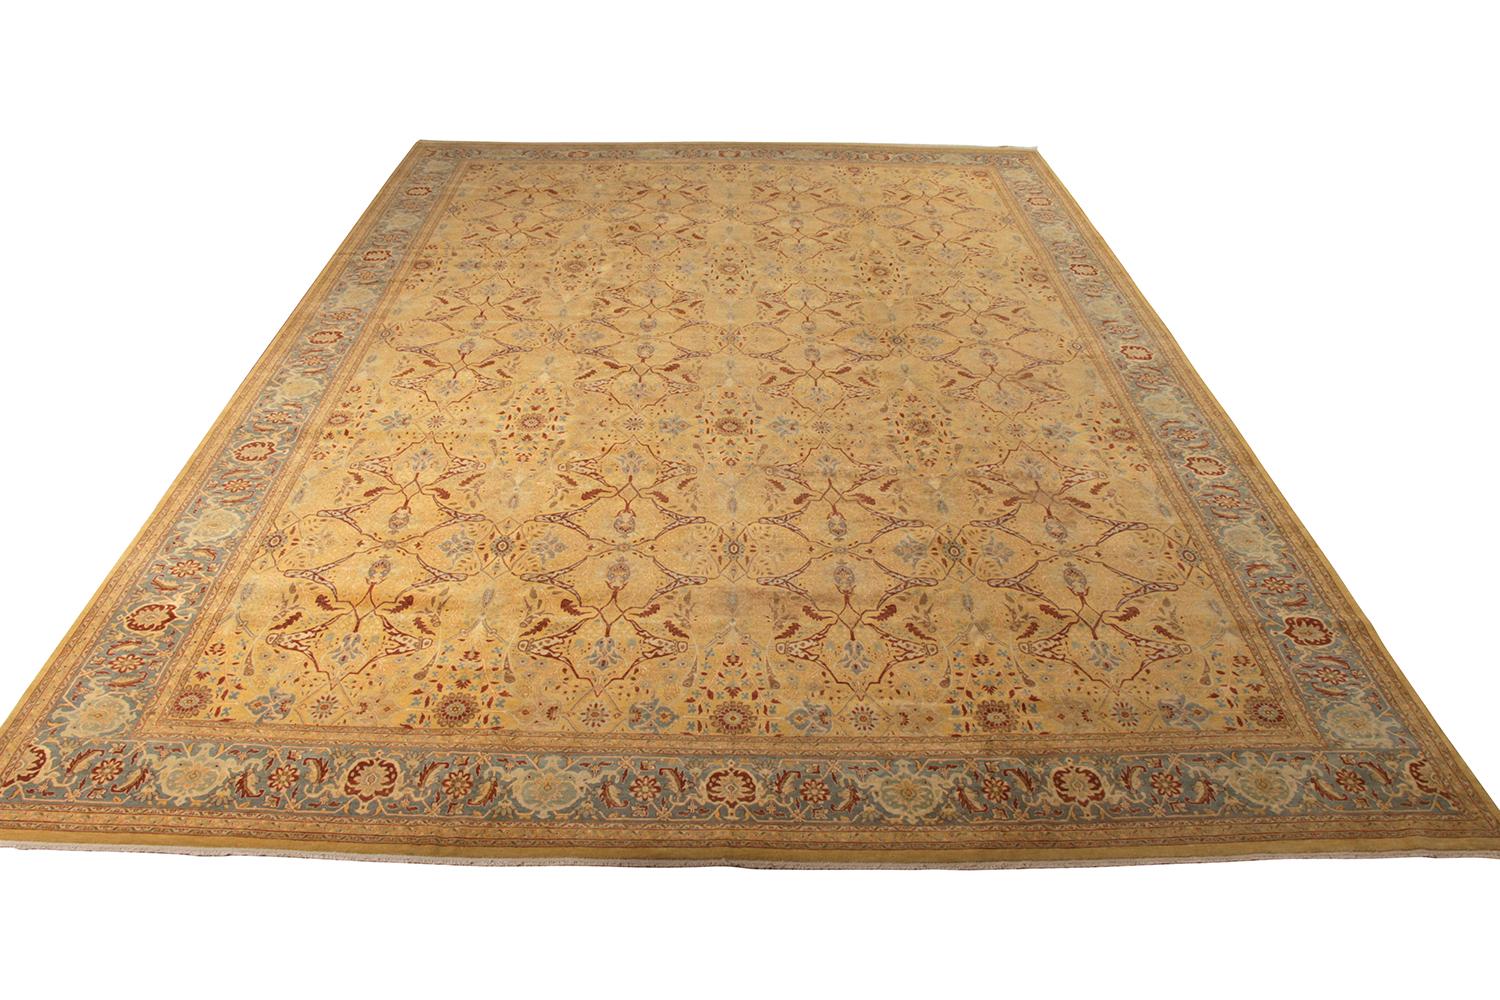 A 12 x 17 rug from the Modern Classics collection by Rug & Kilim, paying homage to some of the most celebrated styles in handmade flooring like this unique large-size nod to Tabriz Persian rugs in a rare beige and gold colorway pattern. 

On the